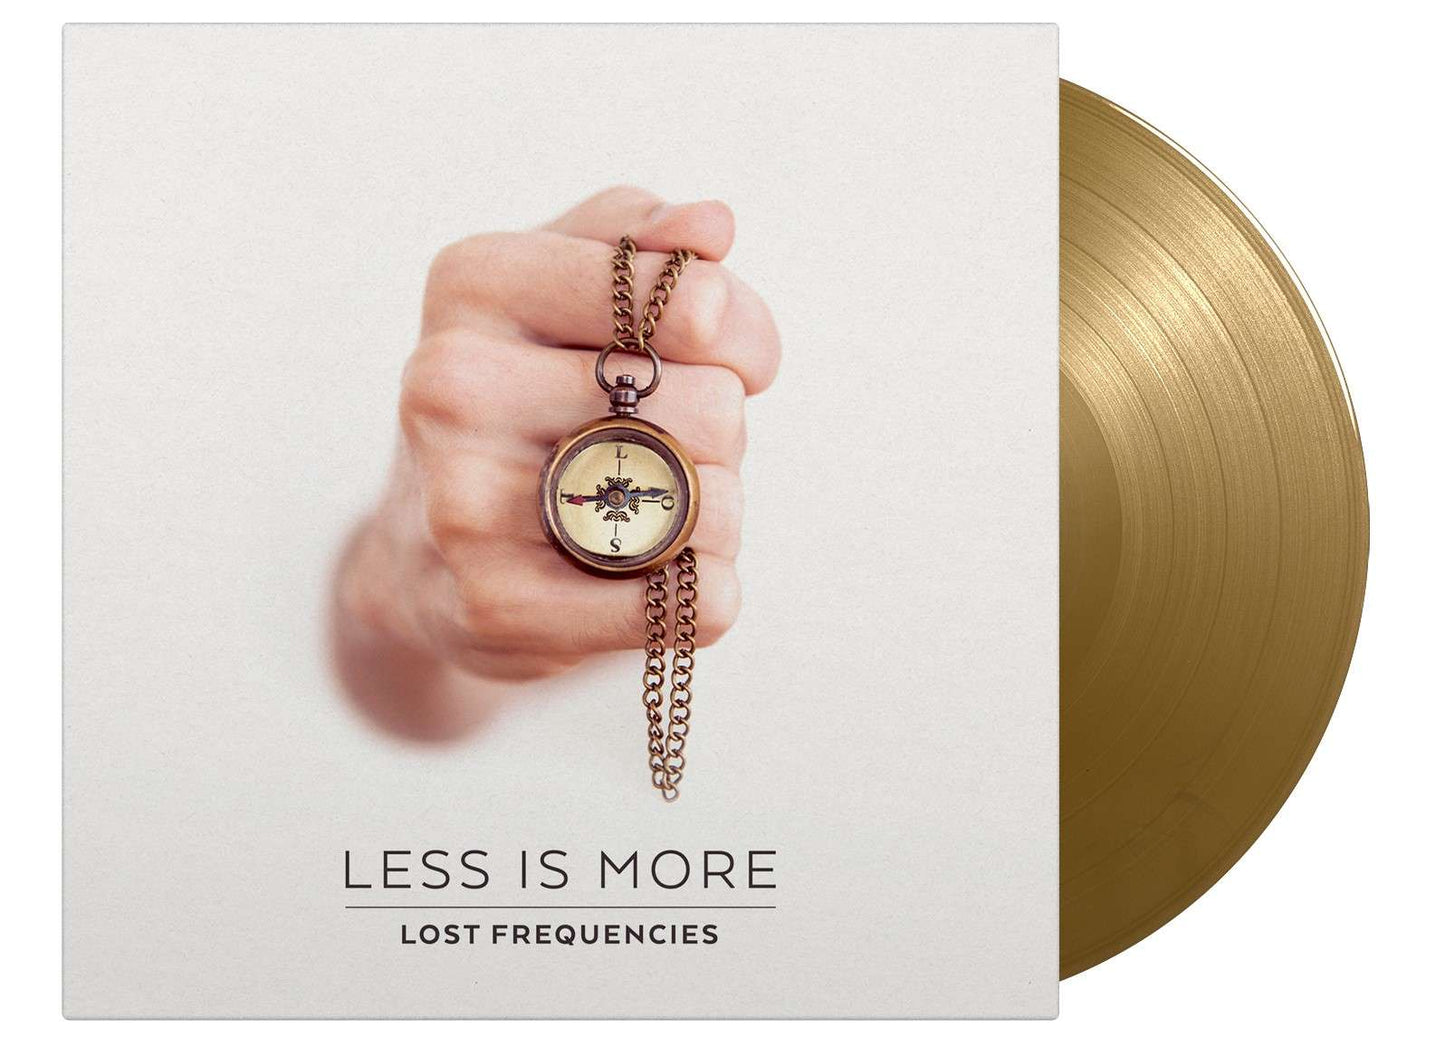 Lost Frequencies: Less Is More (180g) (Limited Numbered Edition) (Gold Vinyl) 2lp